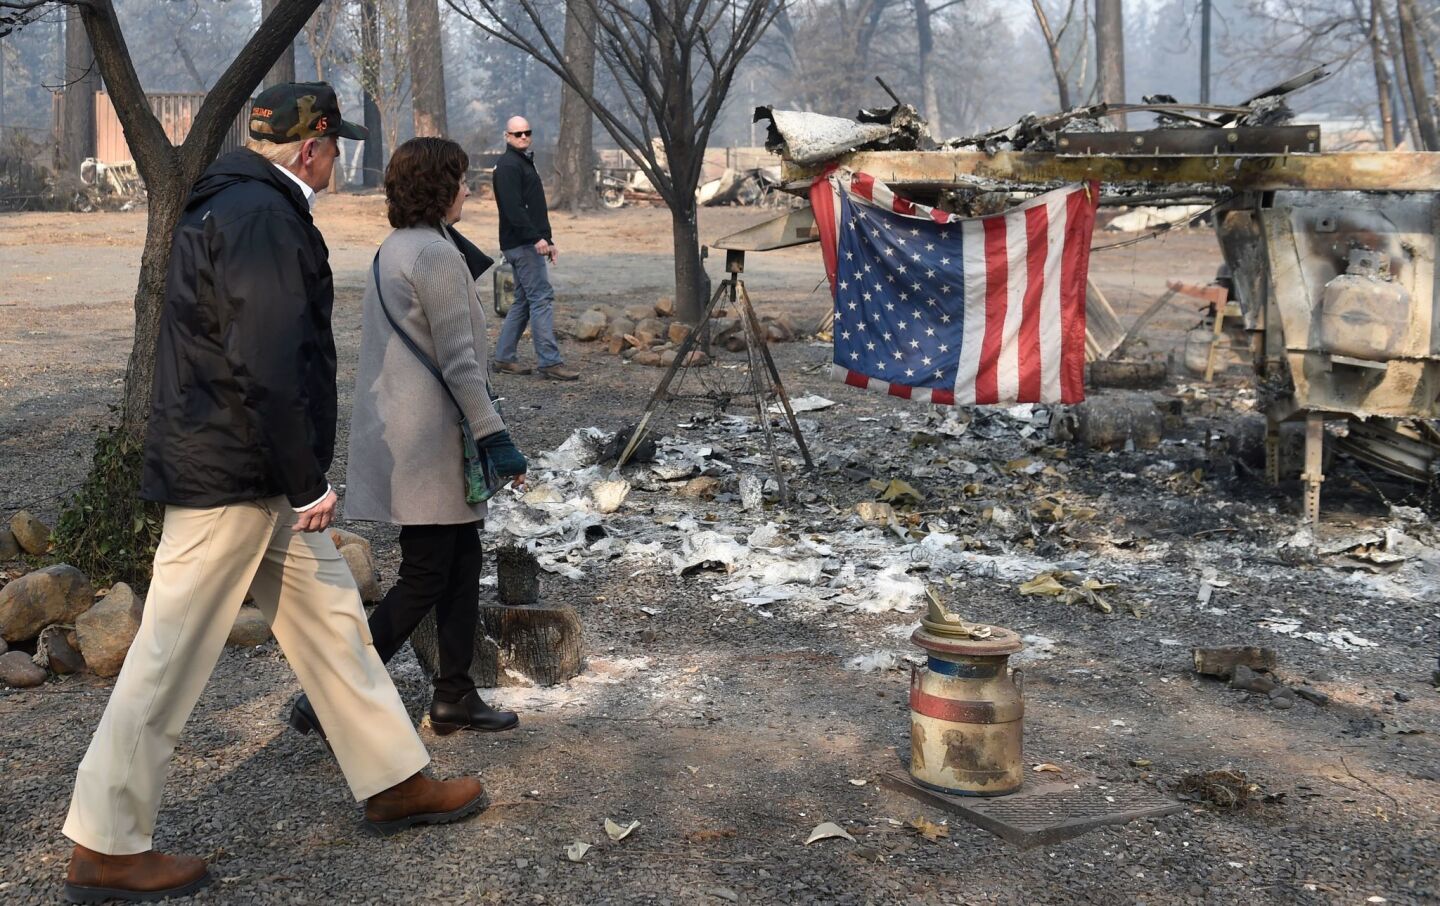 US President Donald Trump views damage from wildfires with Paradise Mayor Jody Jones in Paradise, Calif.